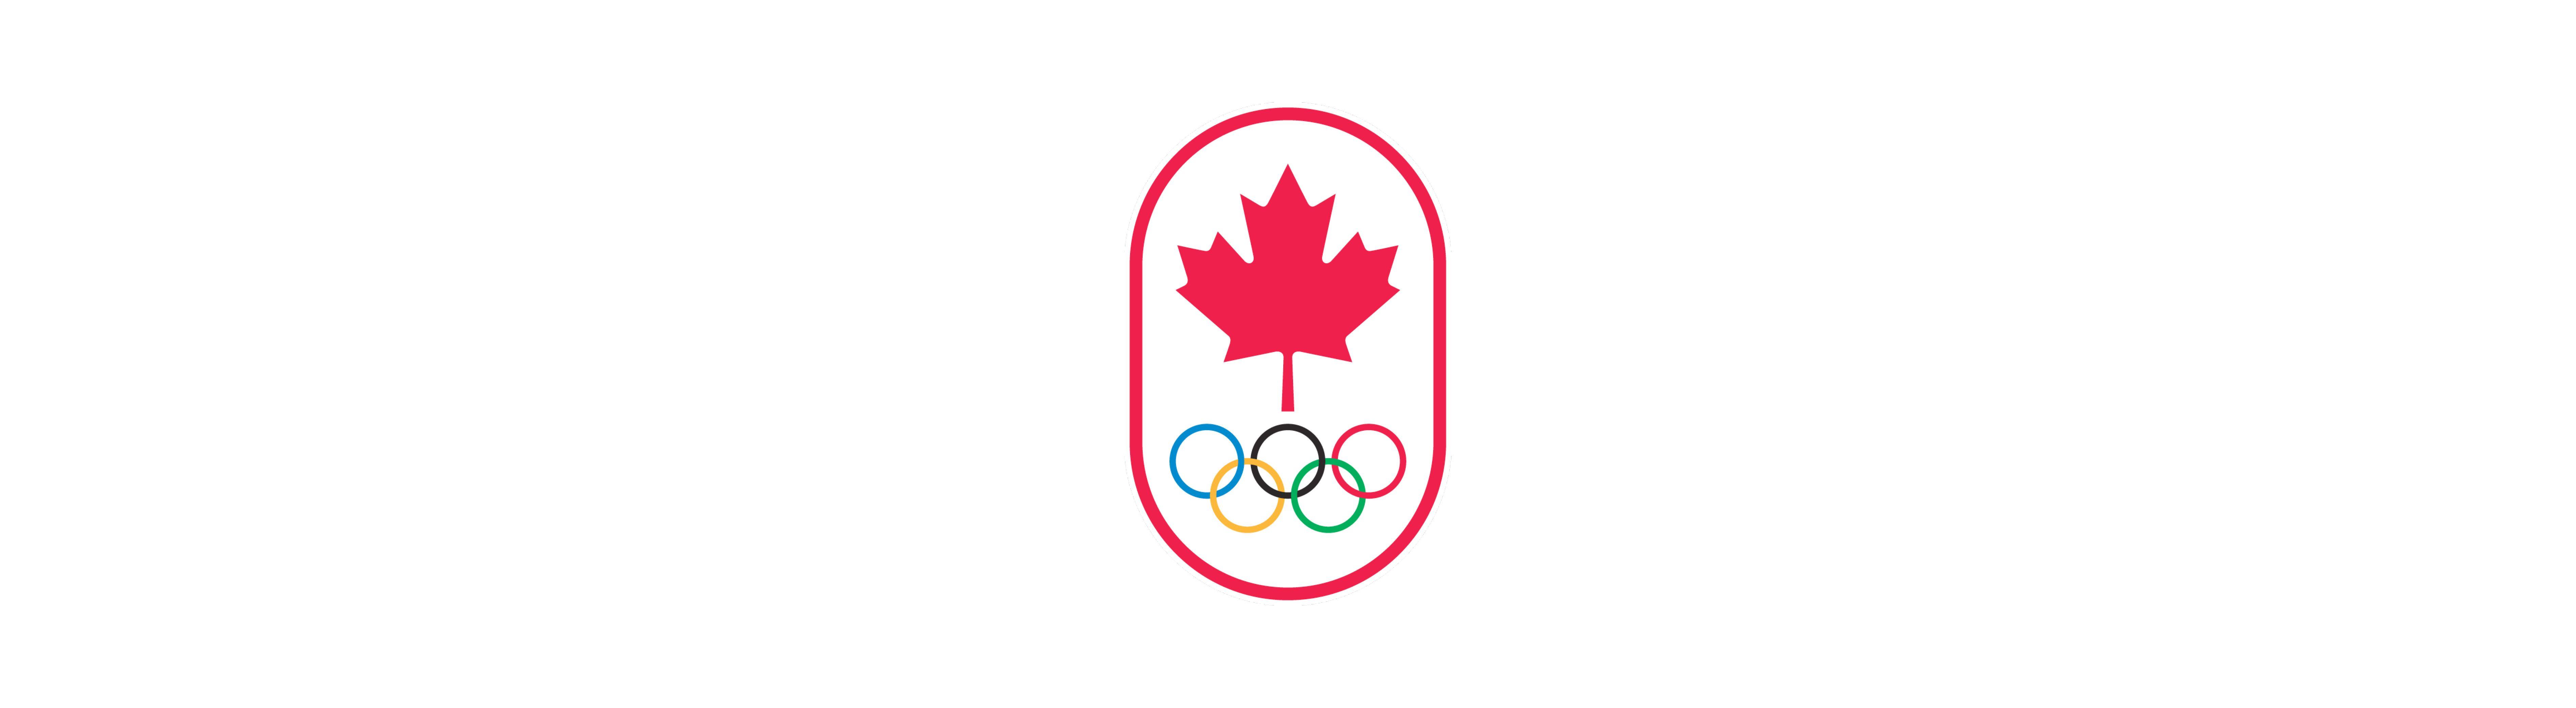 Cot Logo - COT Logo | Team Canada - Official Olympic Team Website